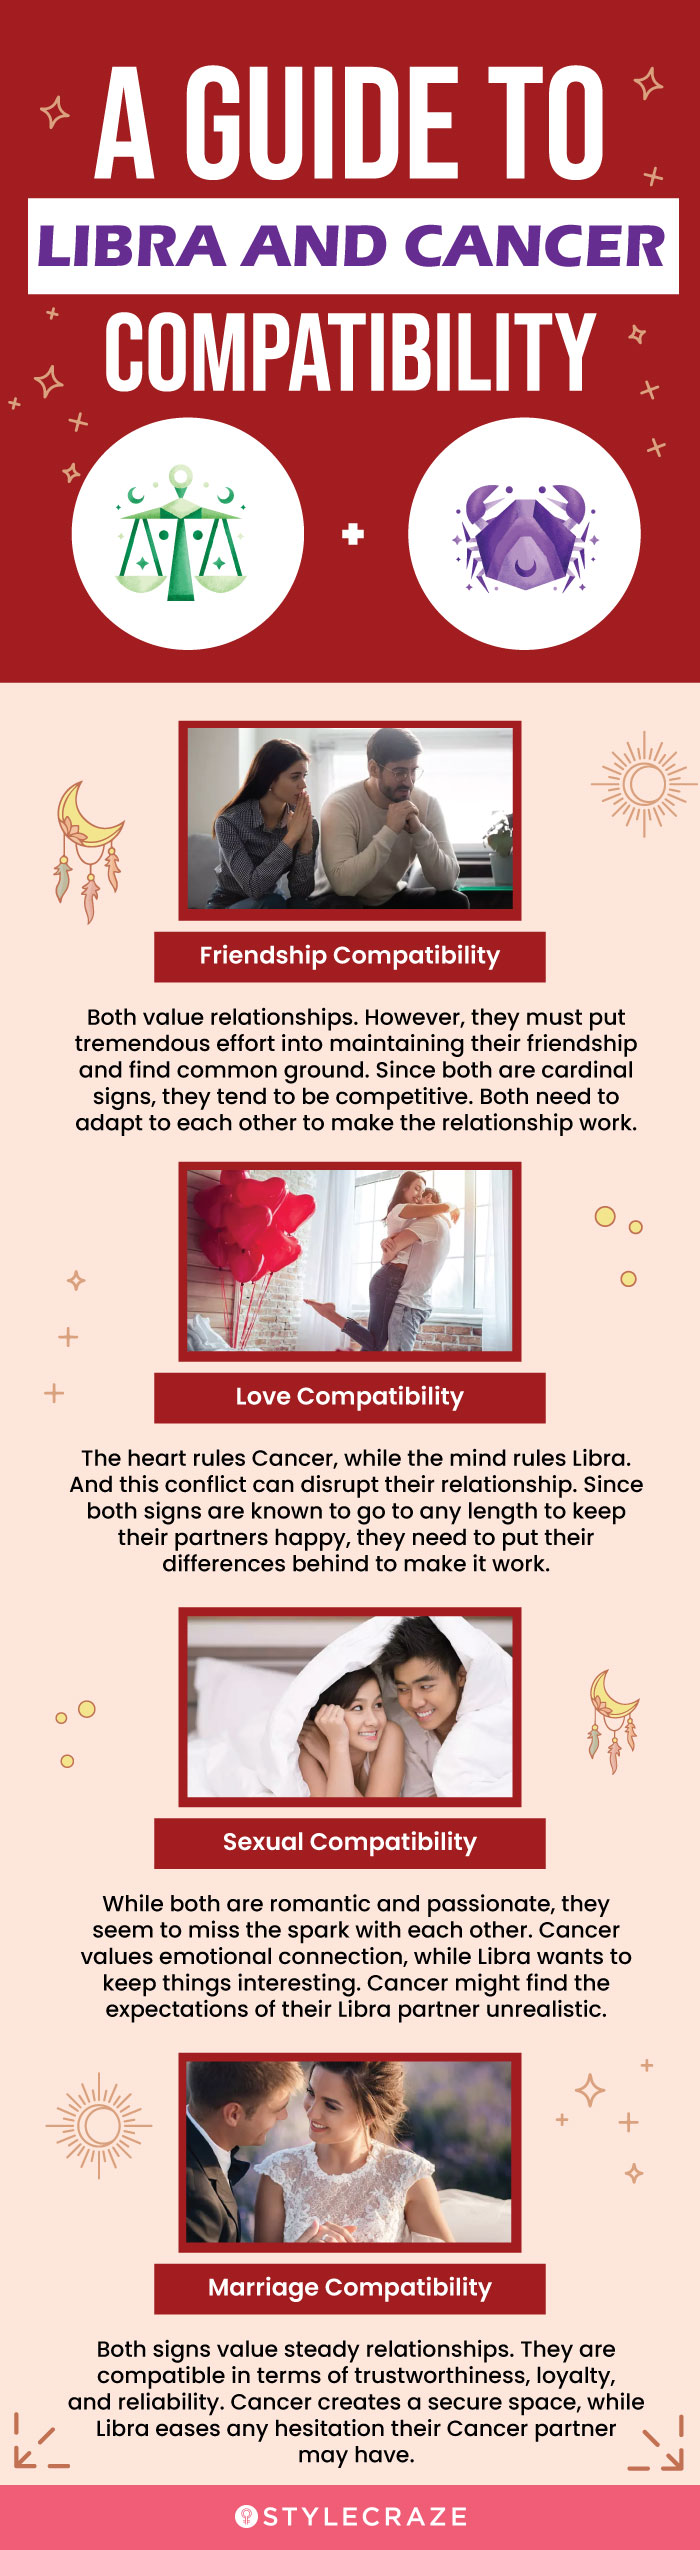 a guide to libra and cancer compatibility (infographic)